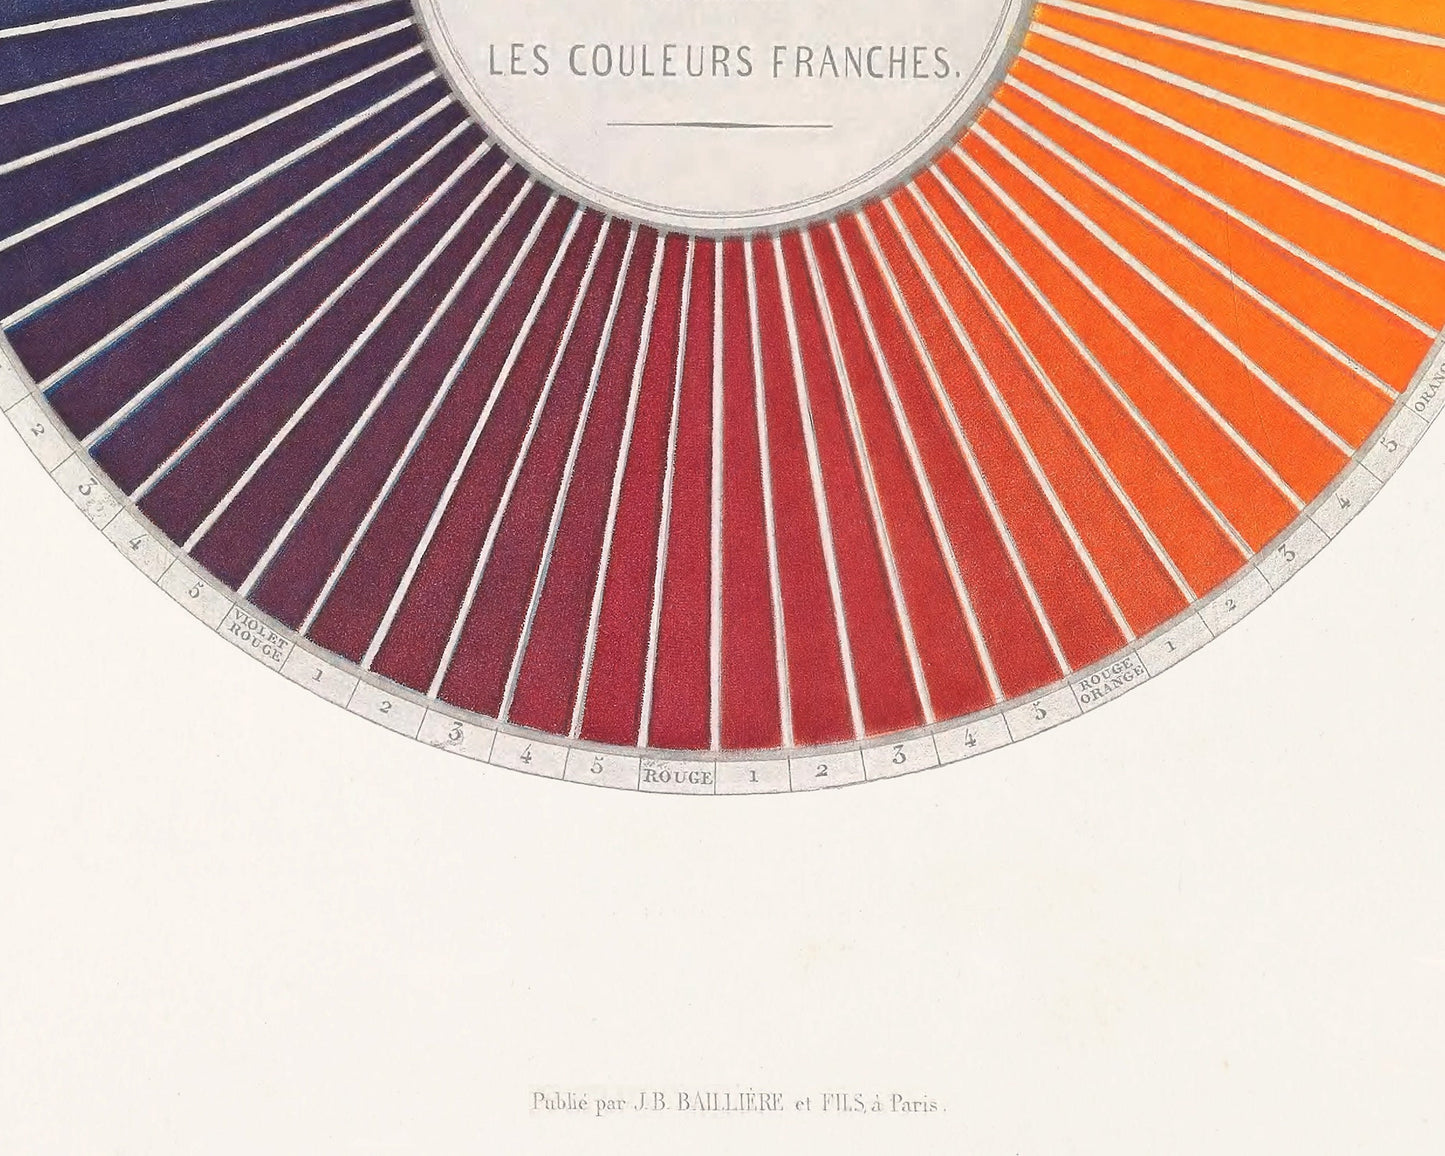 Vintage French color chart | Color wheel art print | Chevreul chromatic circle | Primary colors wall art | Antique design &  color theory